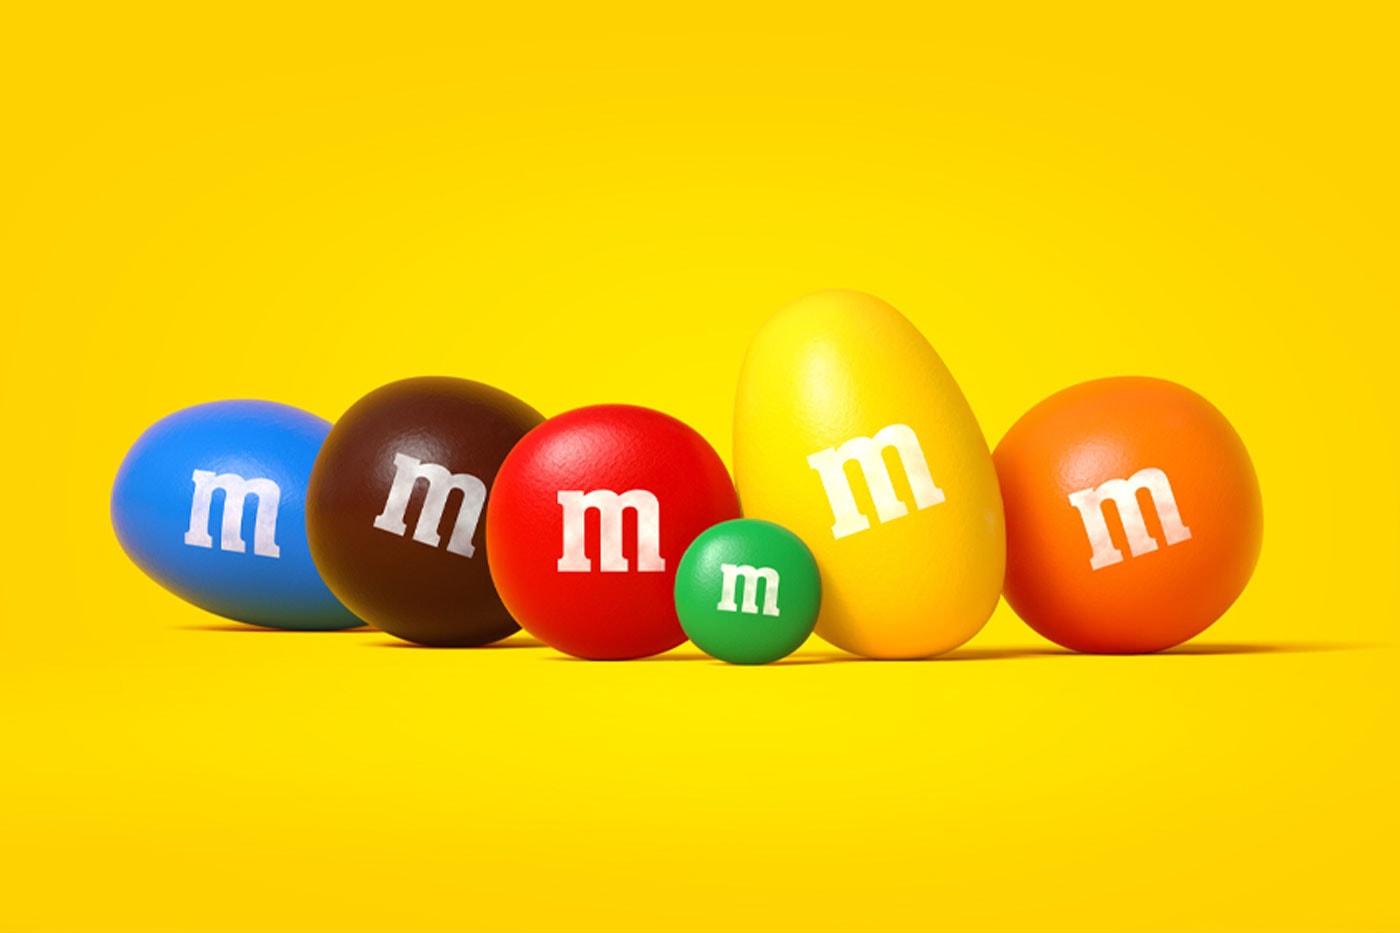 M&M Debuts New Shapes for Its Iconic Chocolate Pieces chocolate colorful candies mars treats 